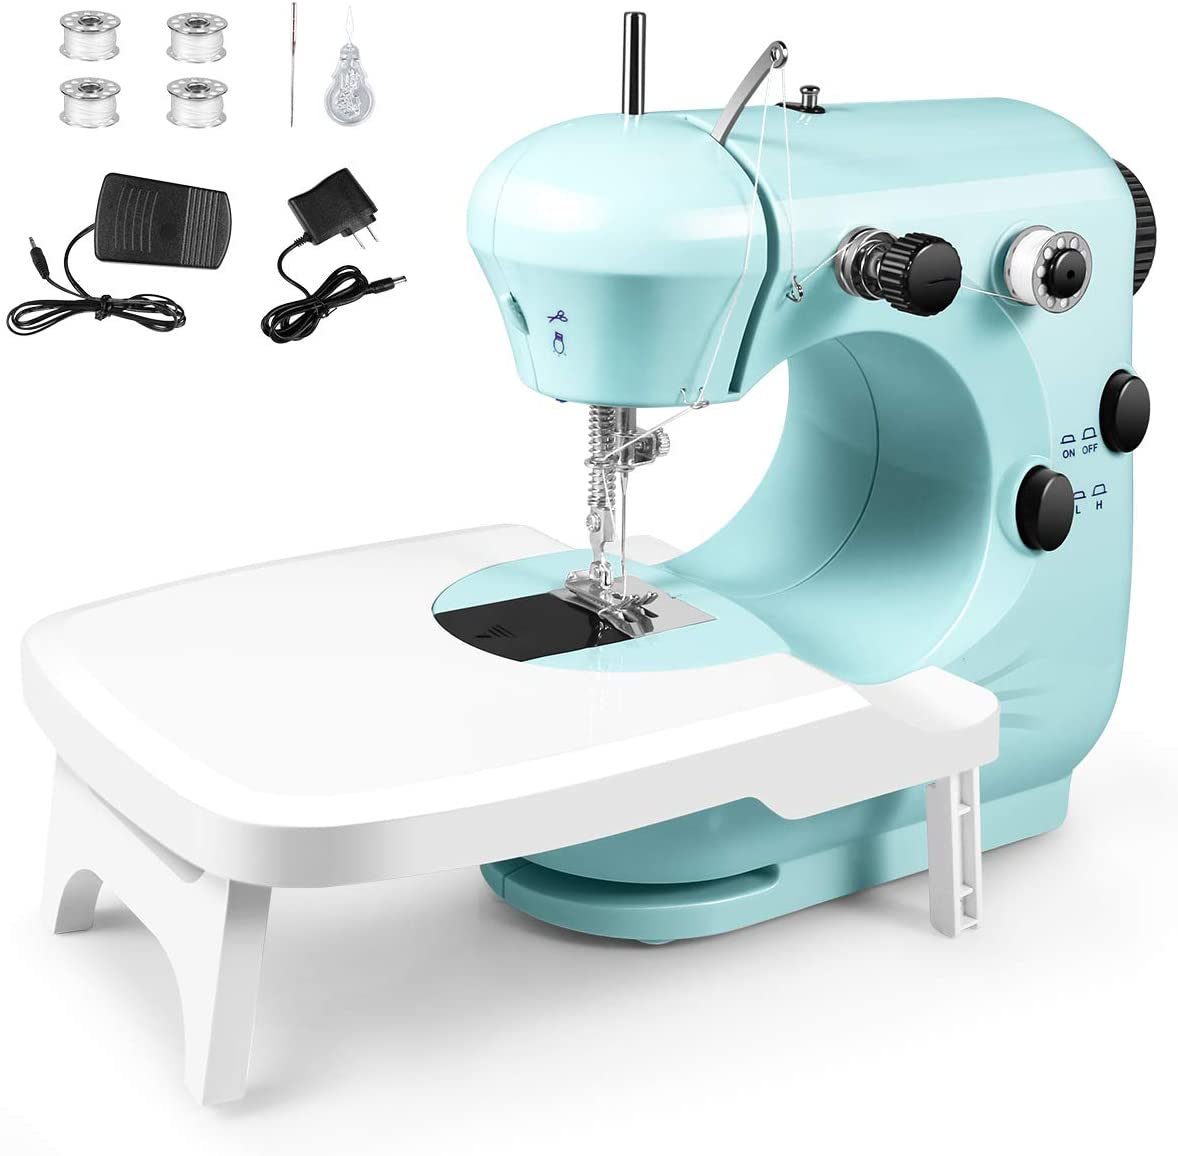 Best Sewing Machine for the Money